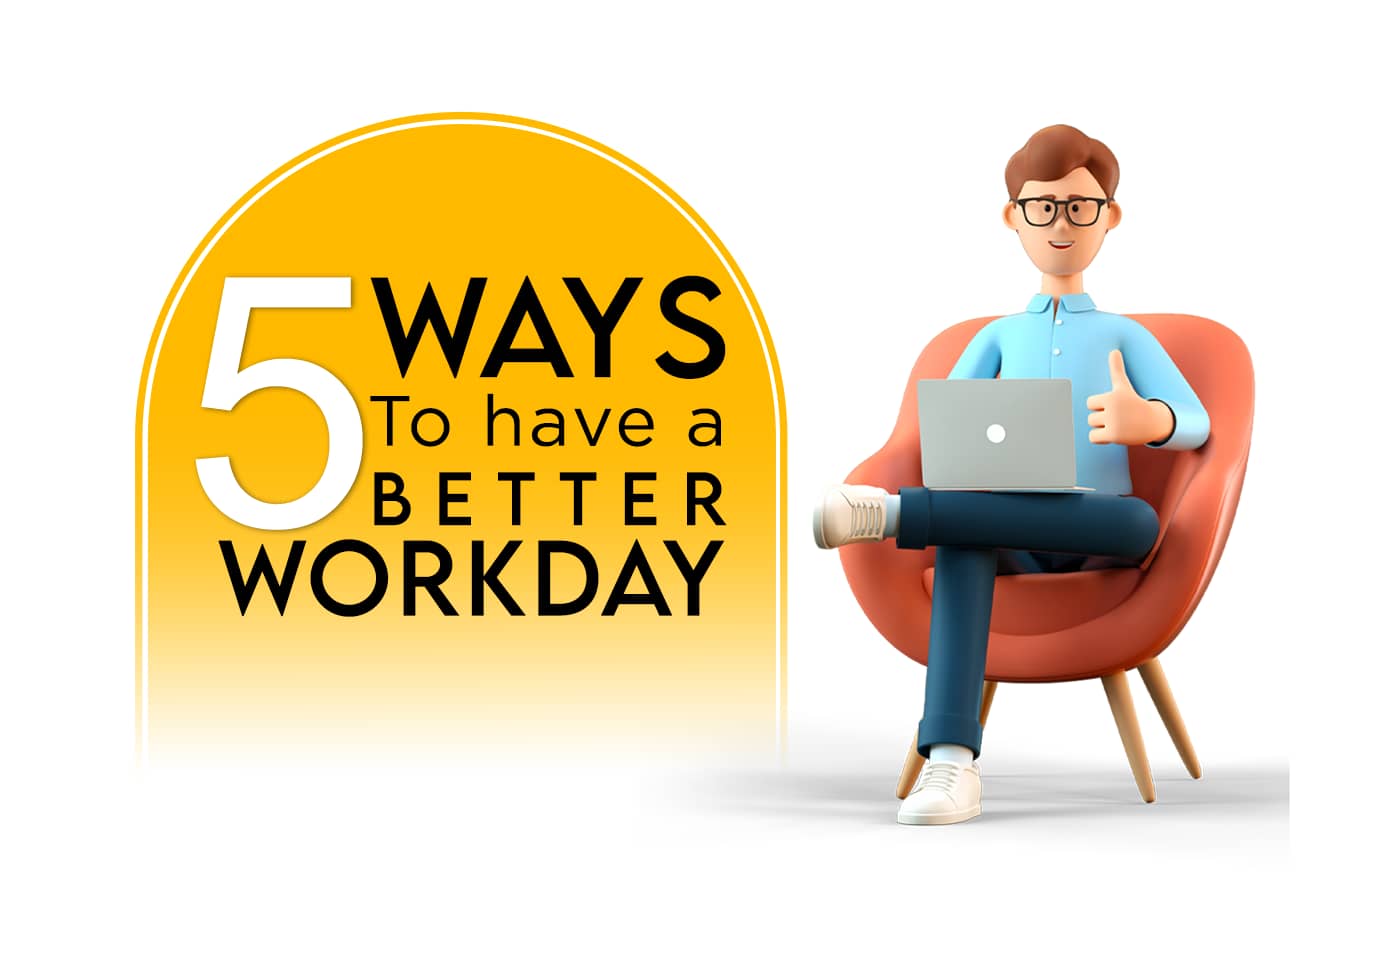 5 Ways to have a better workday